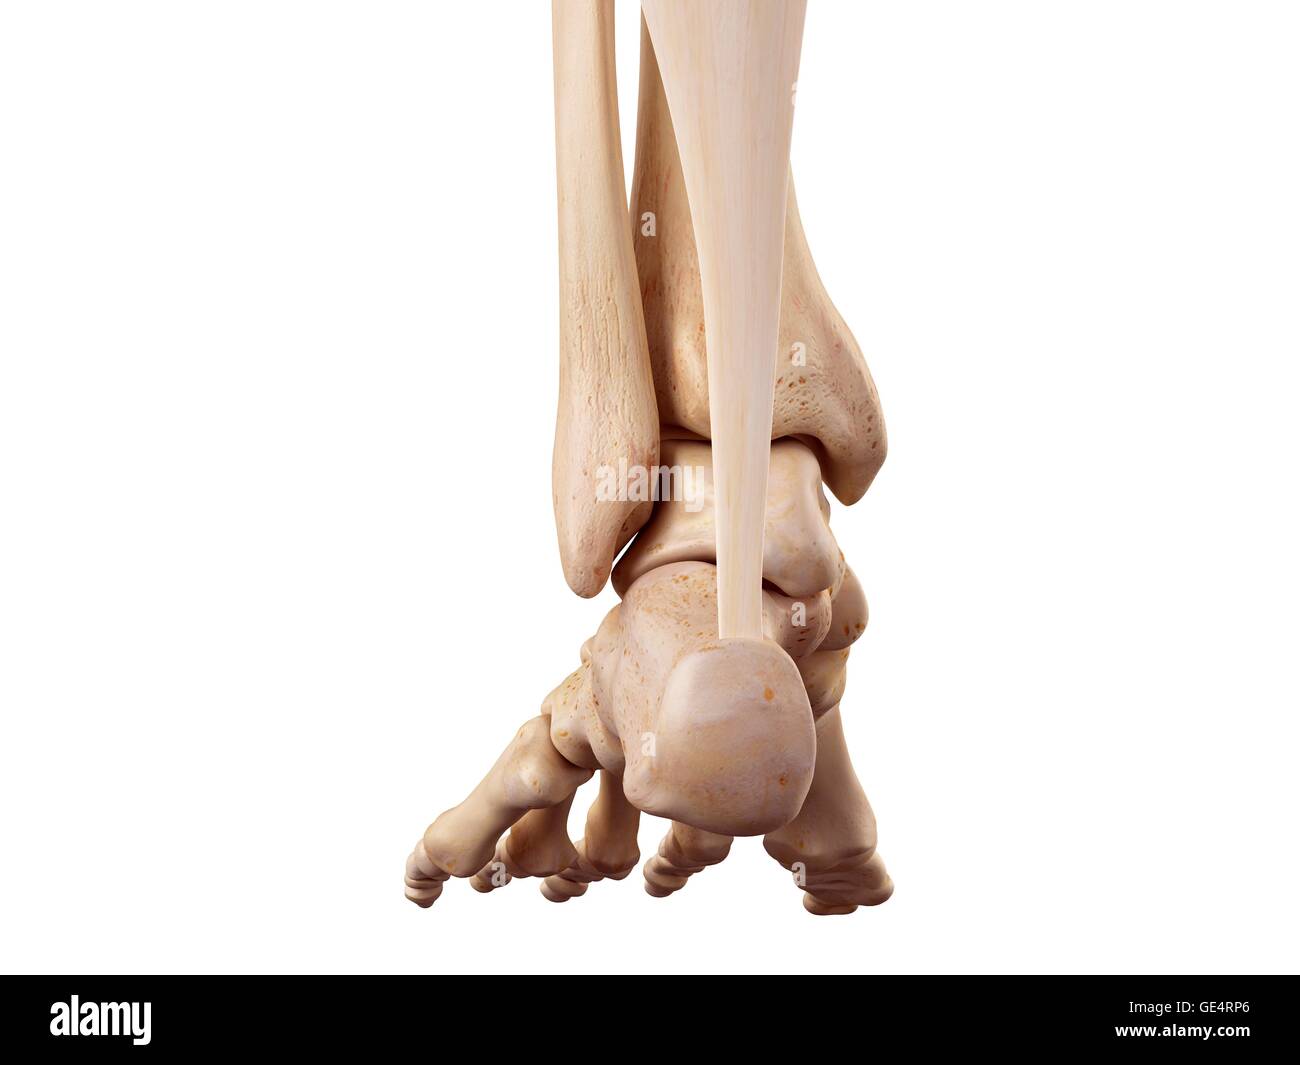 Achilles tendon of the human foot, illustration. Stock Photo